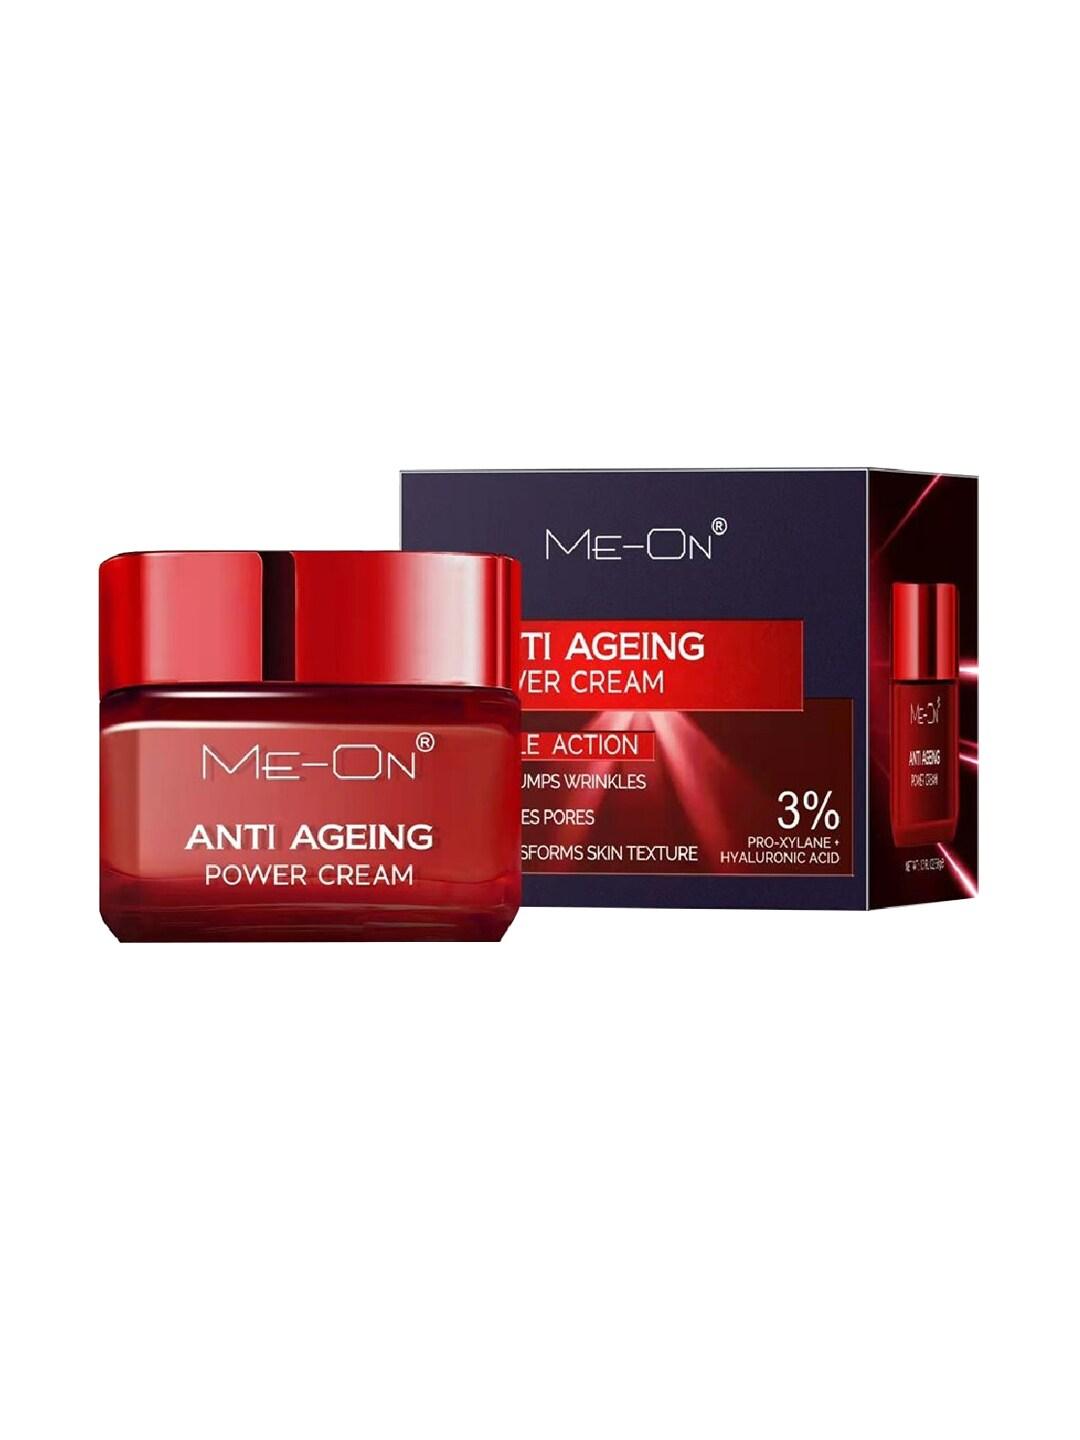 ME-ON Anti-Ageing Power Cream with 3% Pro-Xylane & Hyaluronic Acid - 50g